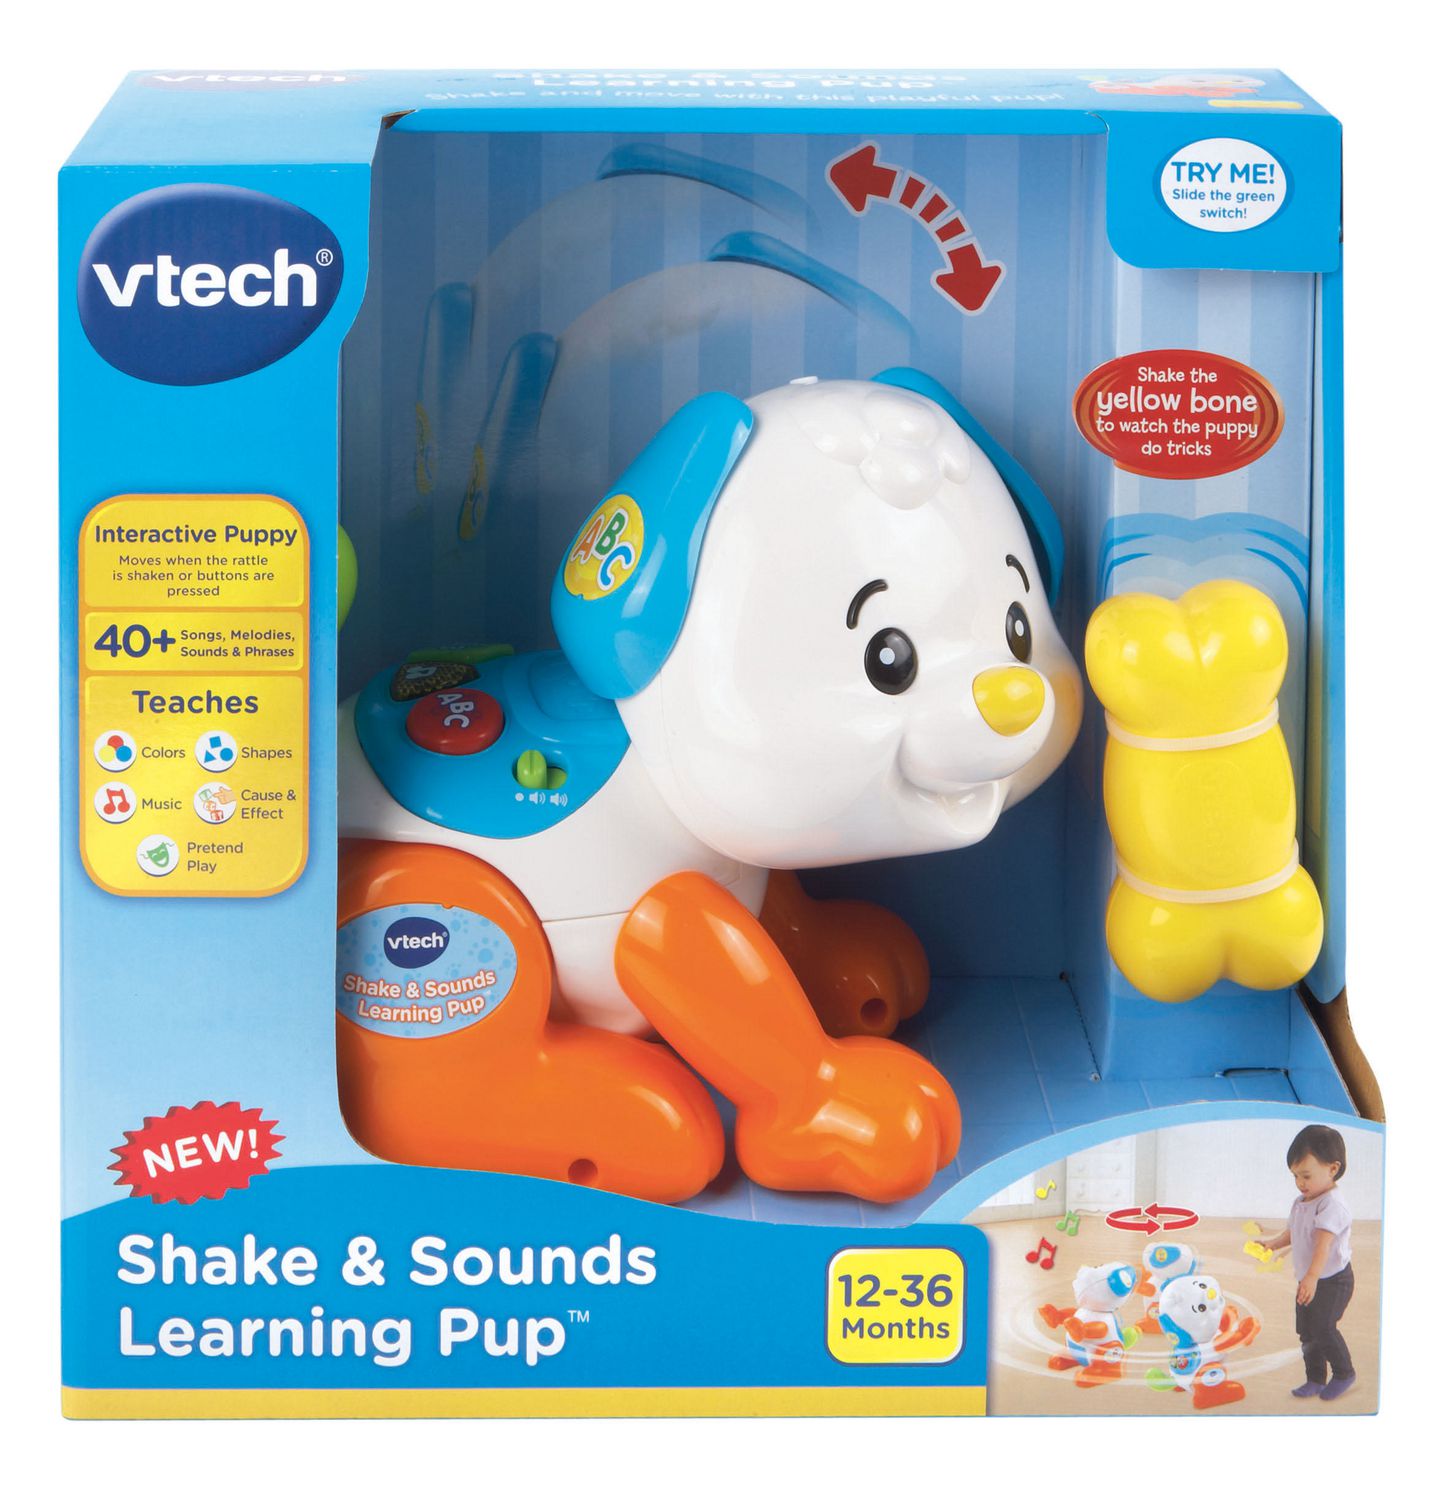 shake & sounds learning pup